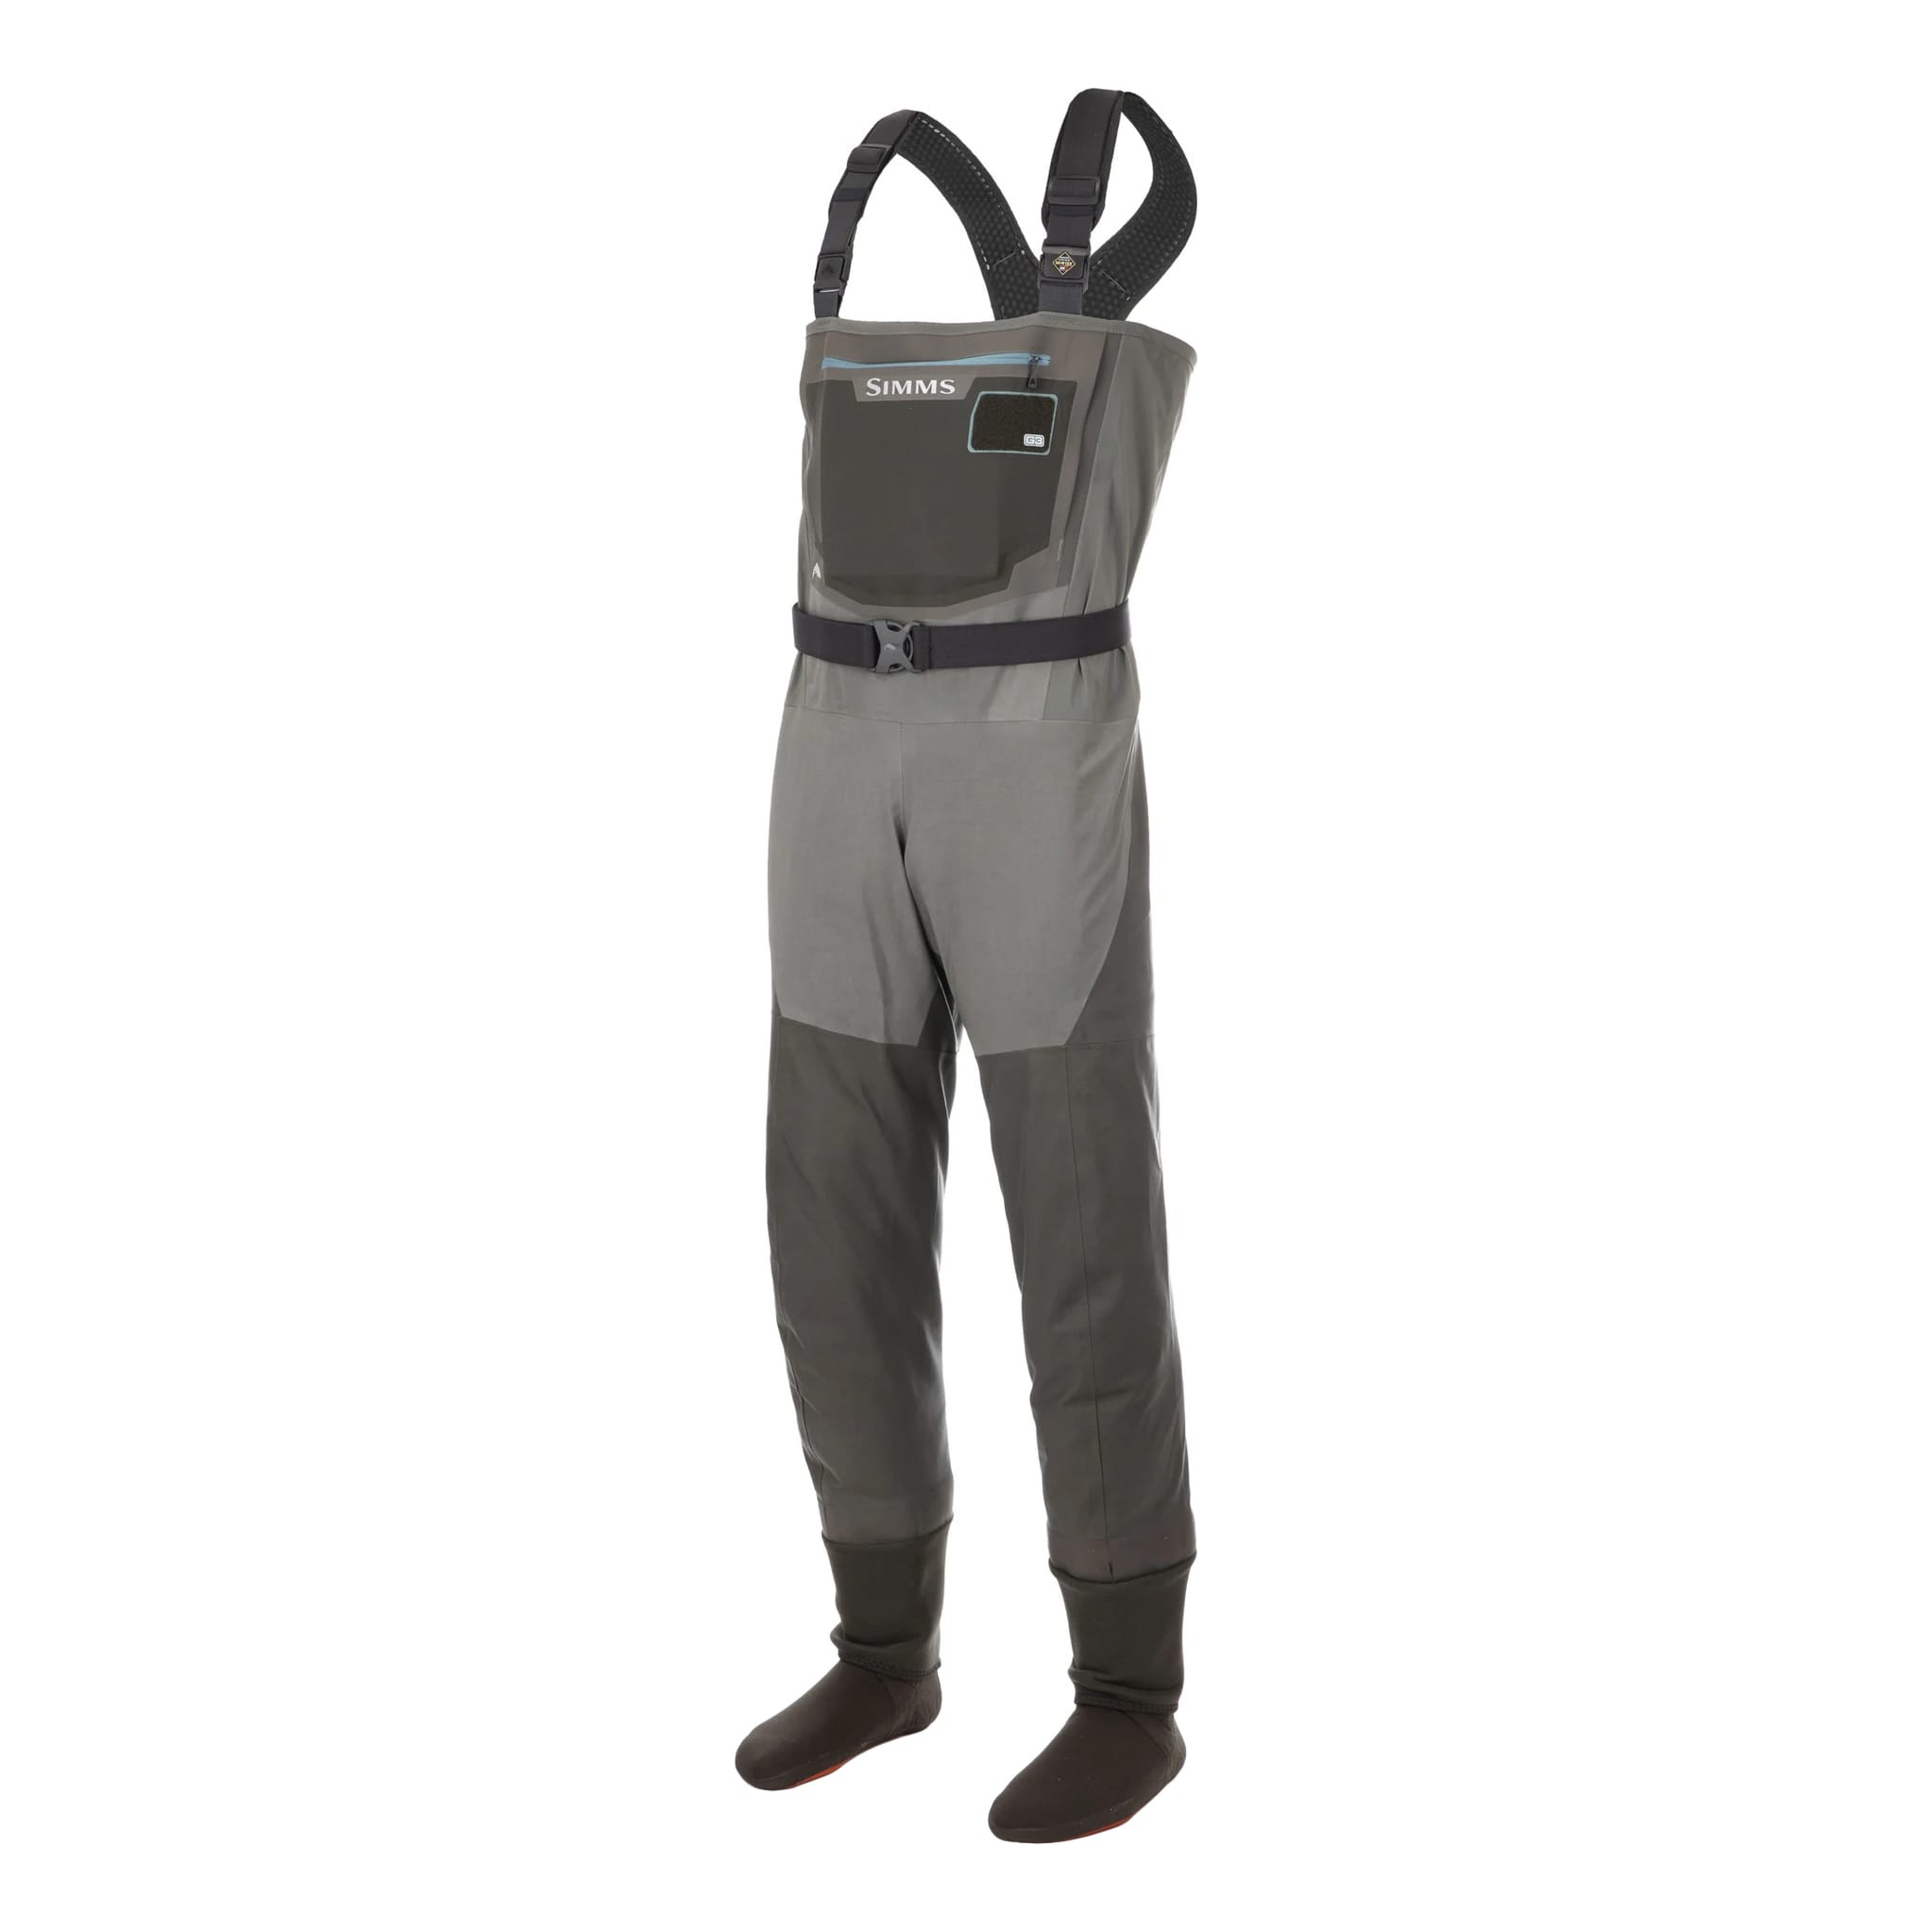 M's G3 Guide Waders - Bootfoot - Felt Sole